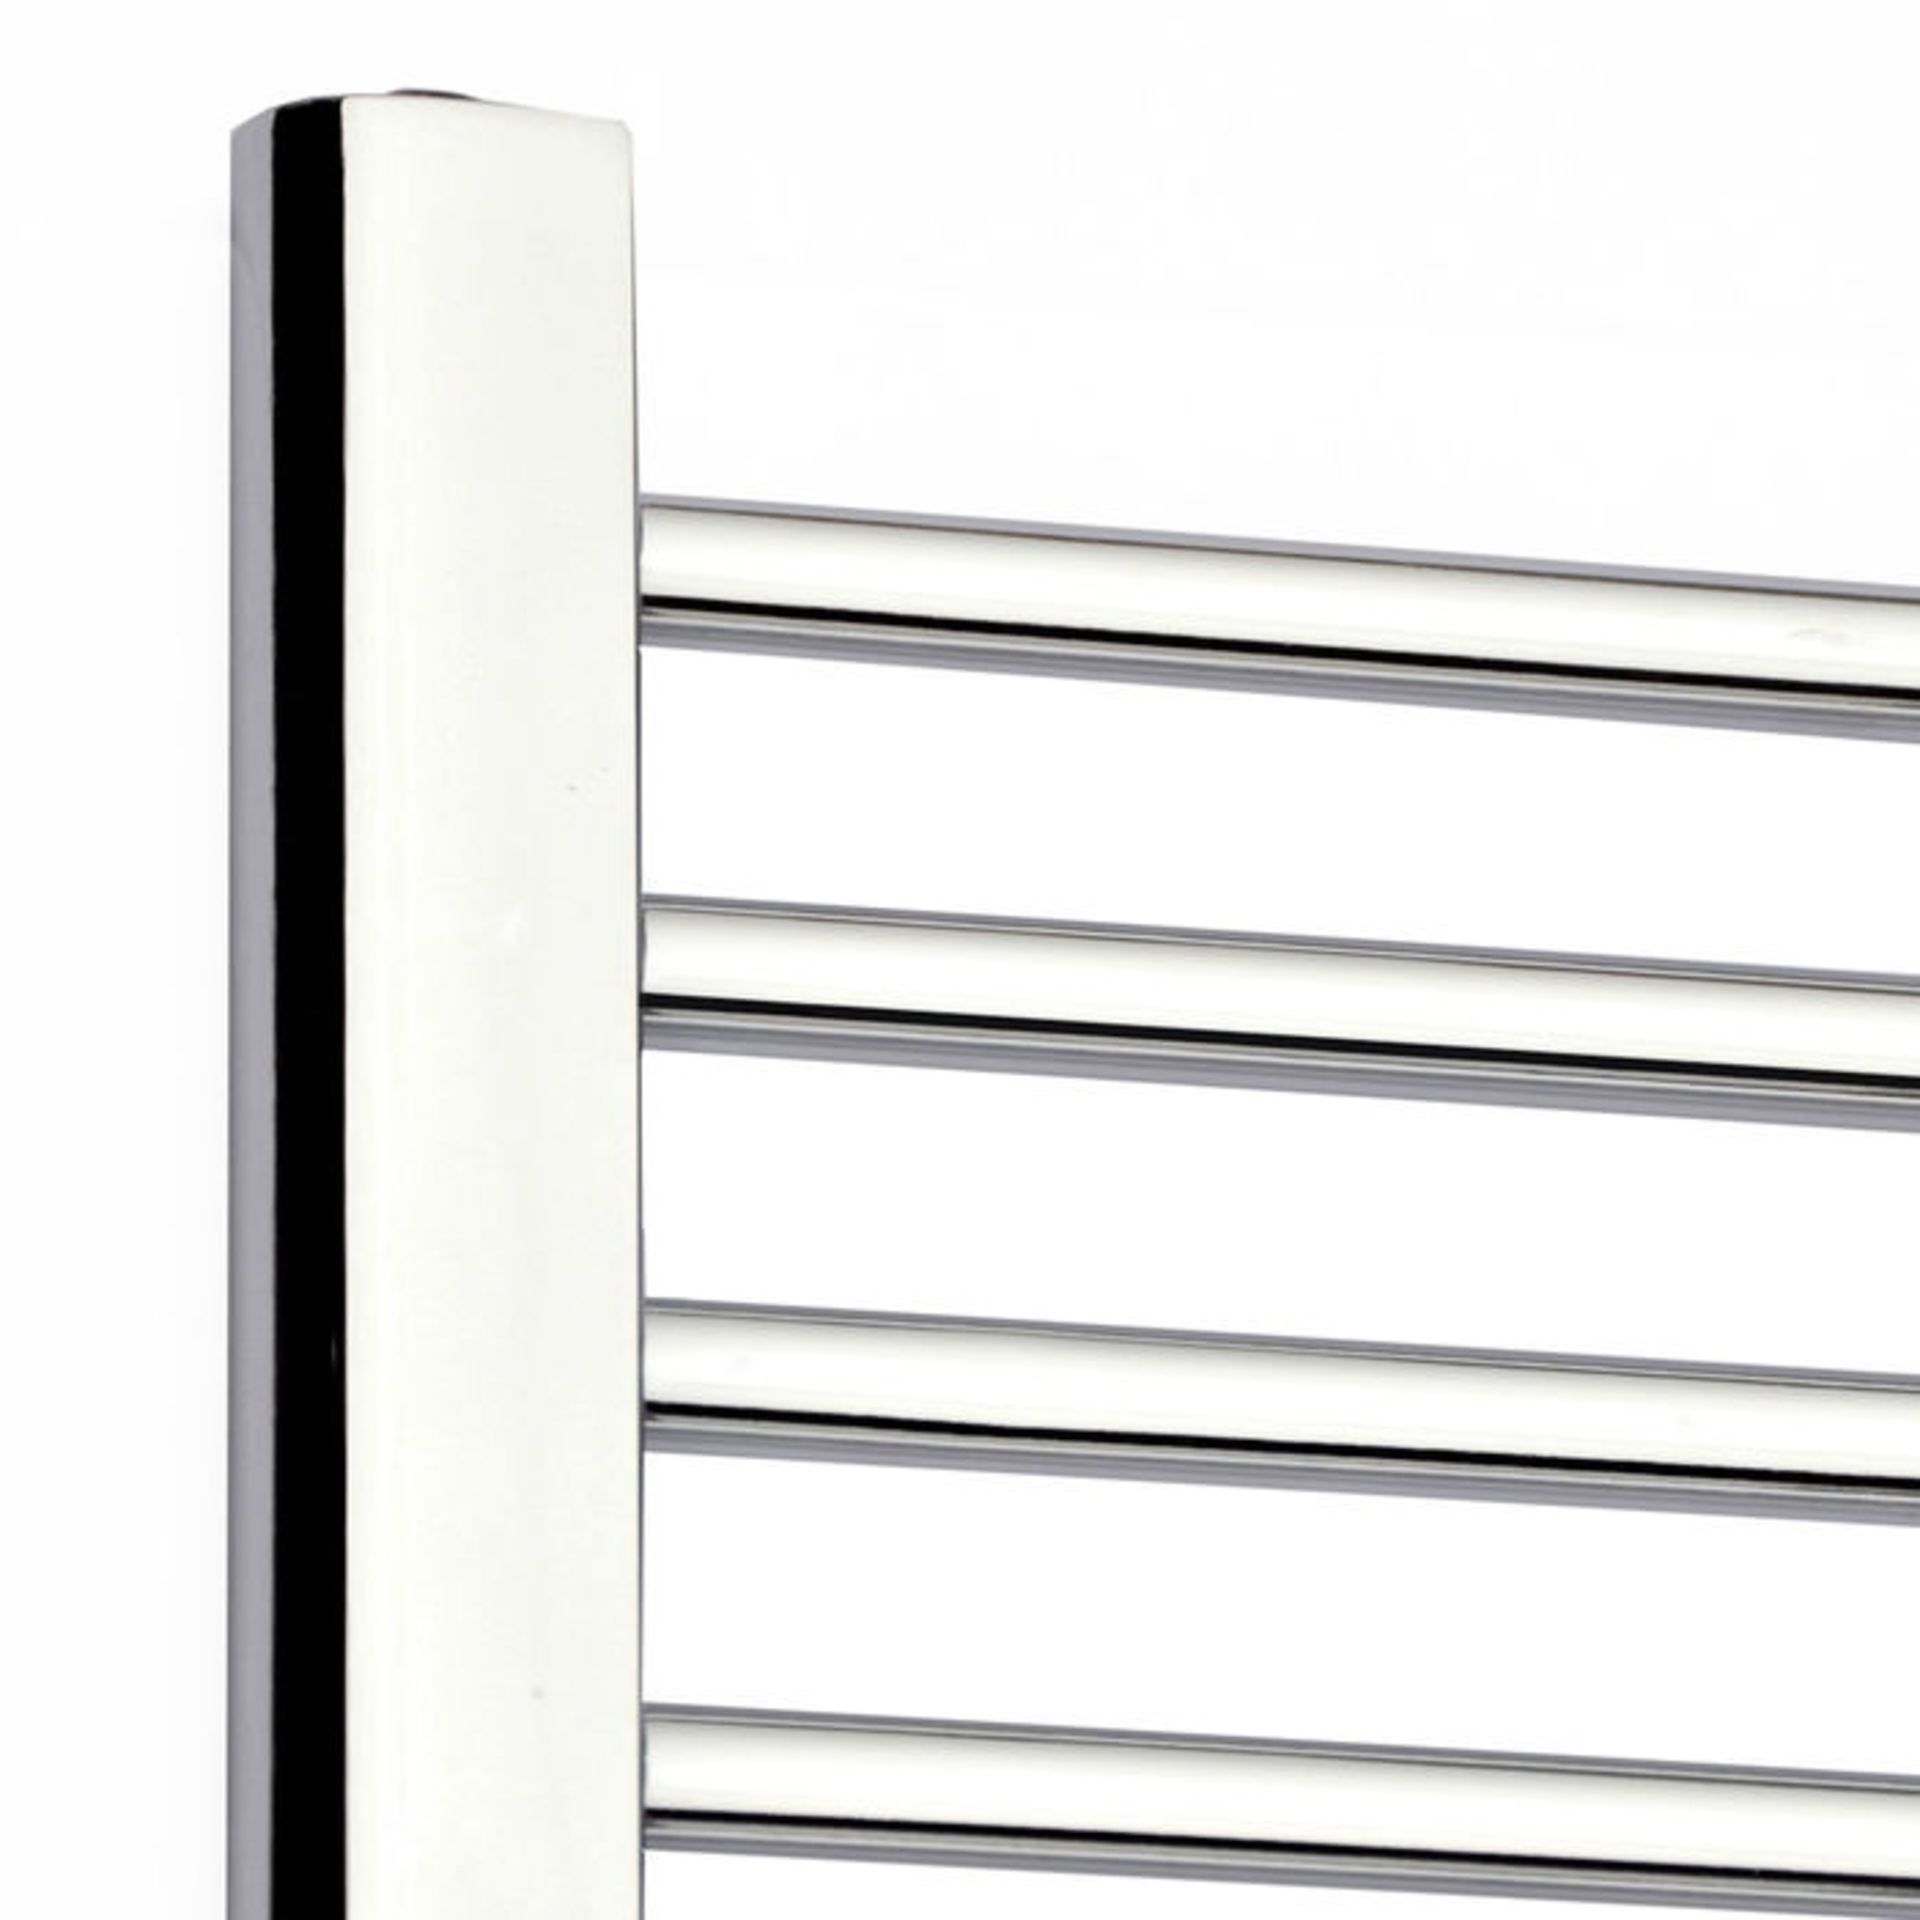 (H4) 1600x400mm - 20mm Tubes - Chrome Heated Straight Rail Ladder Towel Radiator. Low carbon steel - Image 4 of 5